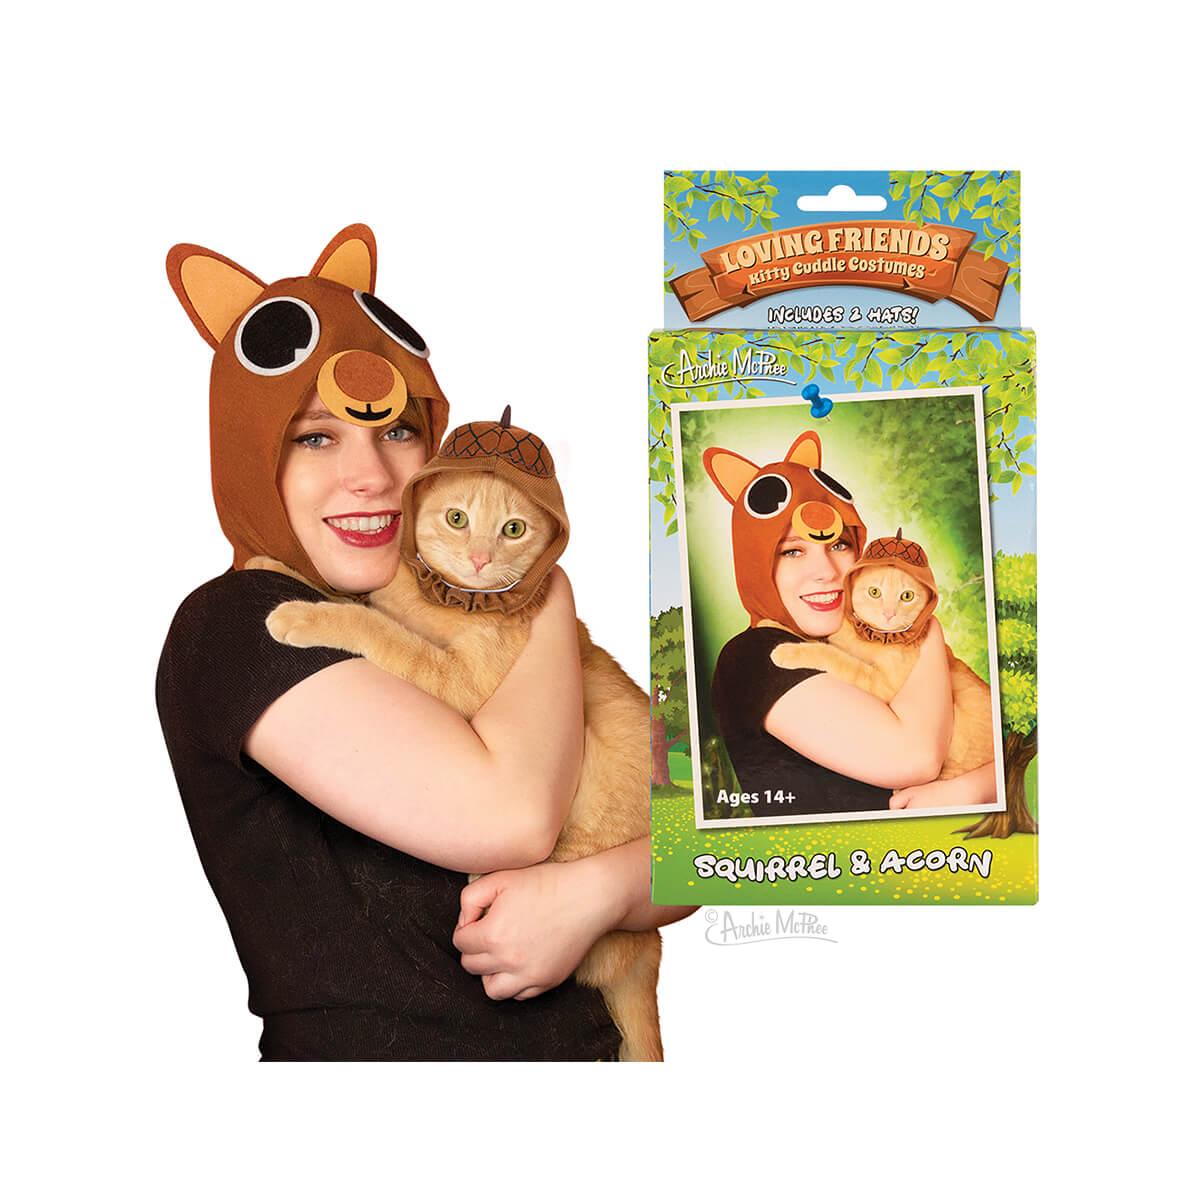  Loving Friends Kitty Cuddle Costumes : Squirrel And Acorn